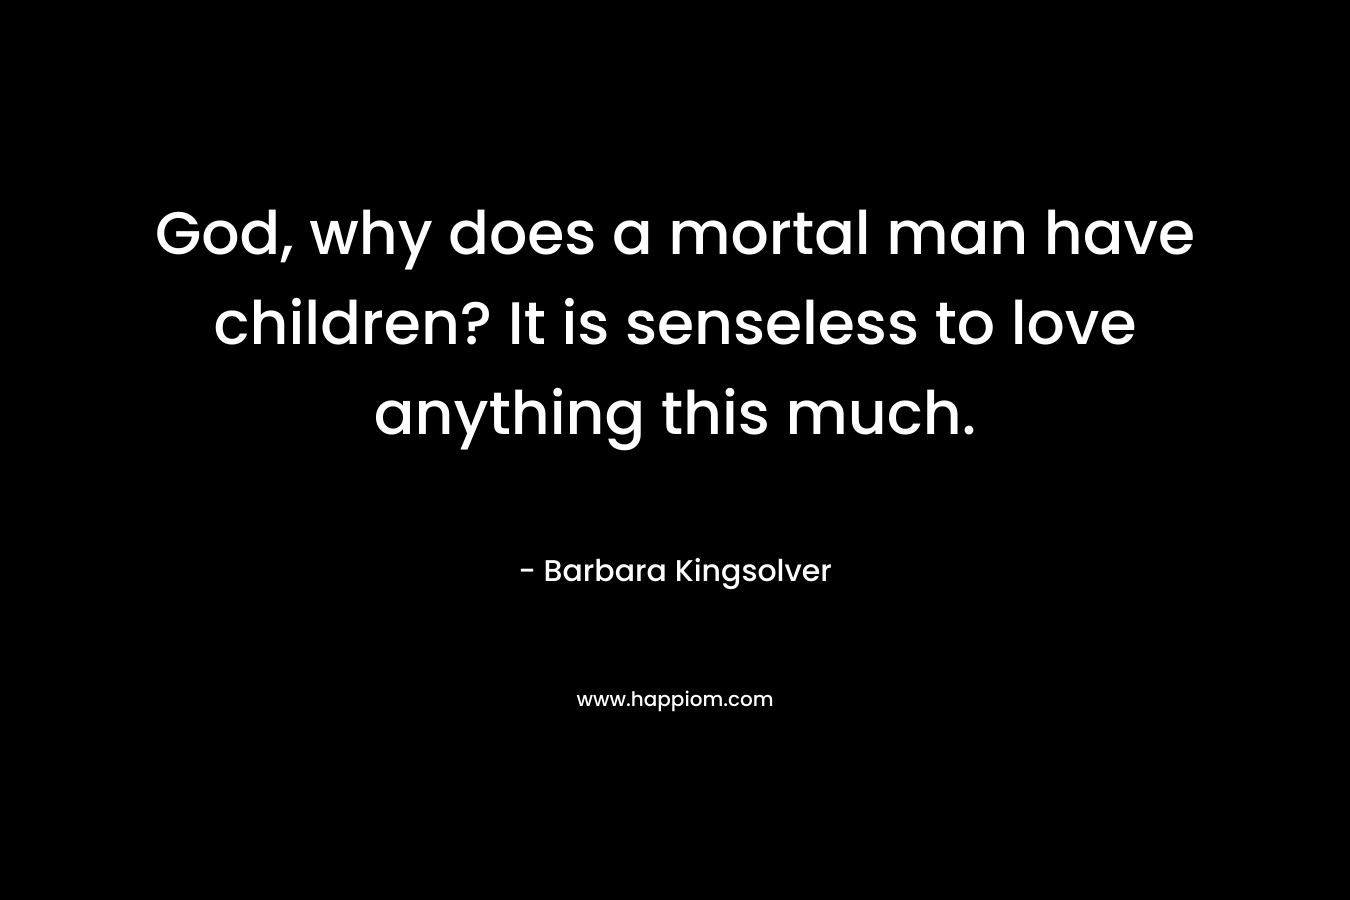 God, why does a mortal man have children? It is senseless to love anything this much.